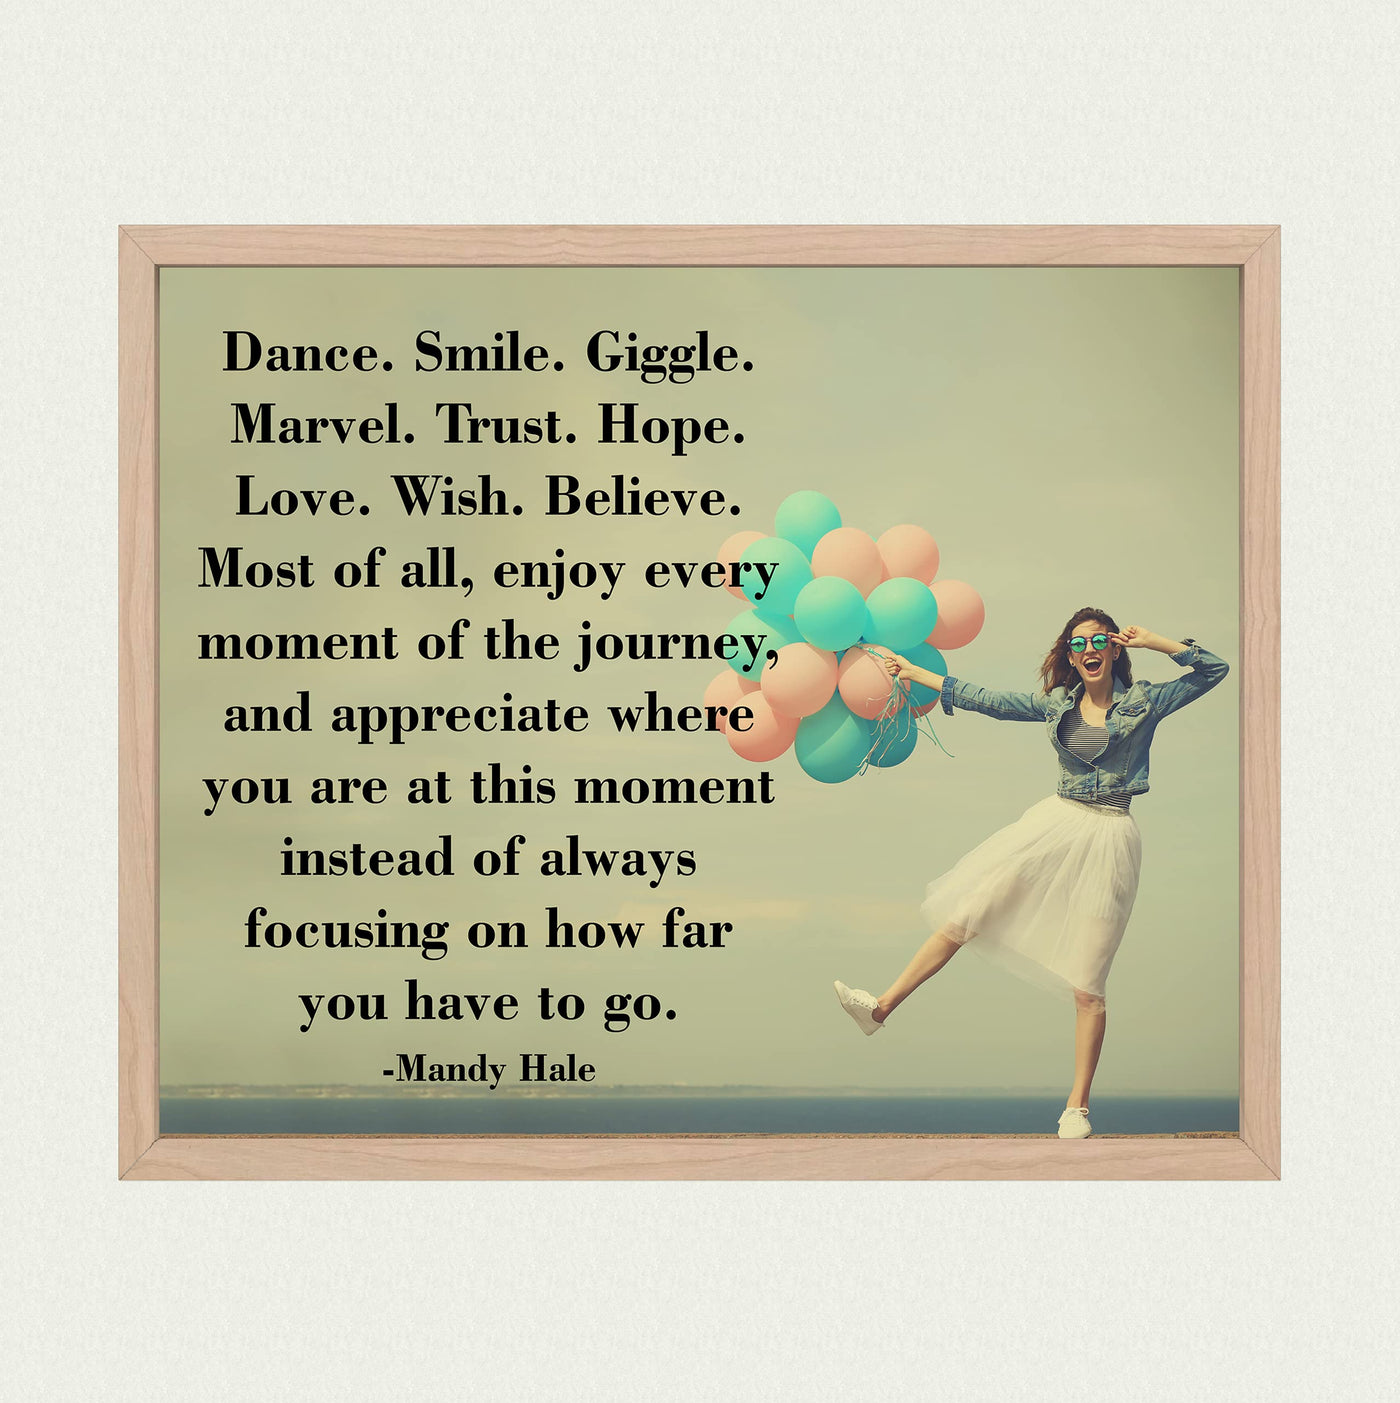 Enjoy Every Moment of the Journey-Inspirational Quotes Wall Art-10x8" Typographic Woman w/Balloons Photo Print-Ready to Frame. Motivational Home-Office-Classroom Decor. Great Gift for Inspiration!